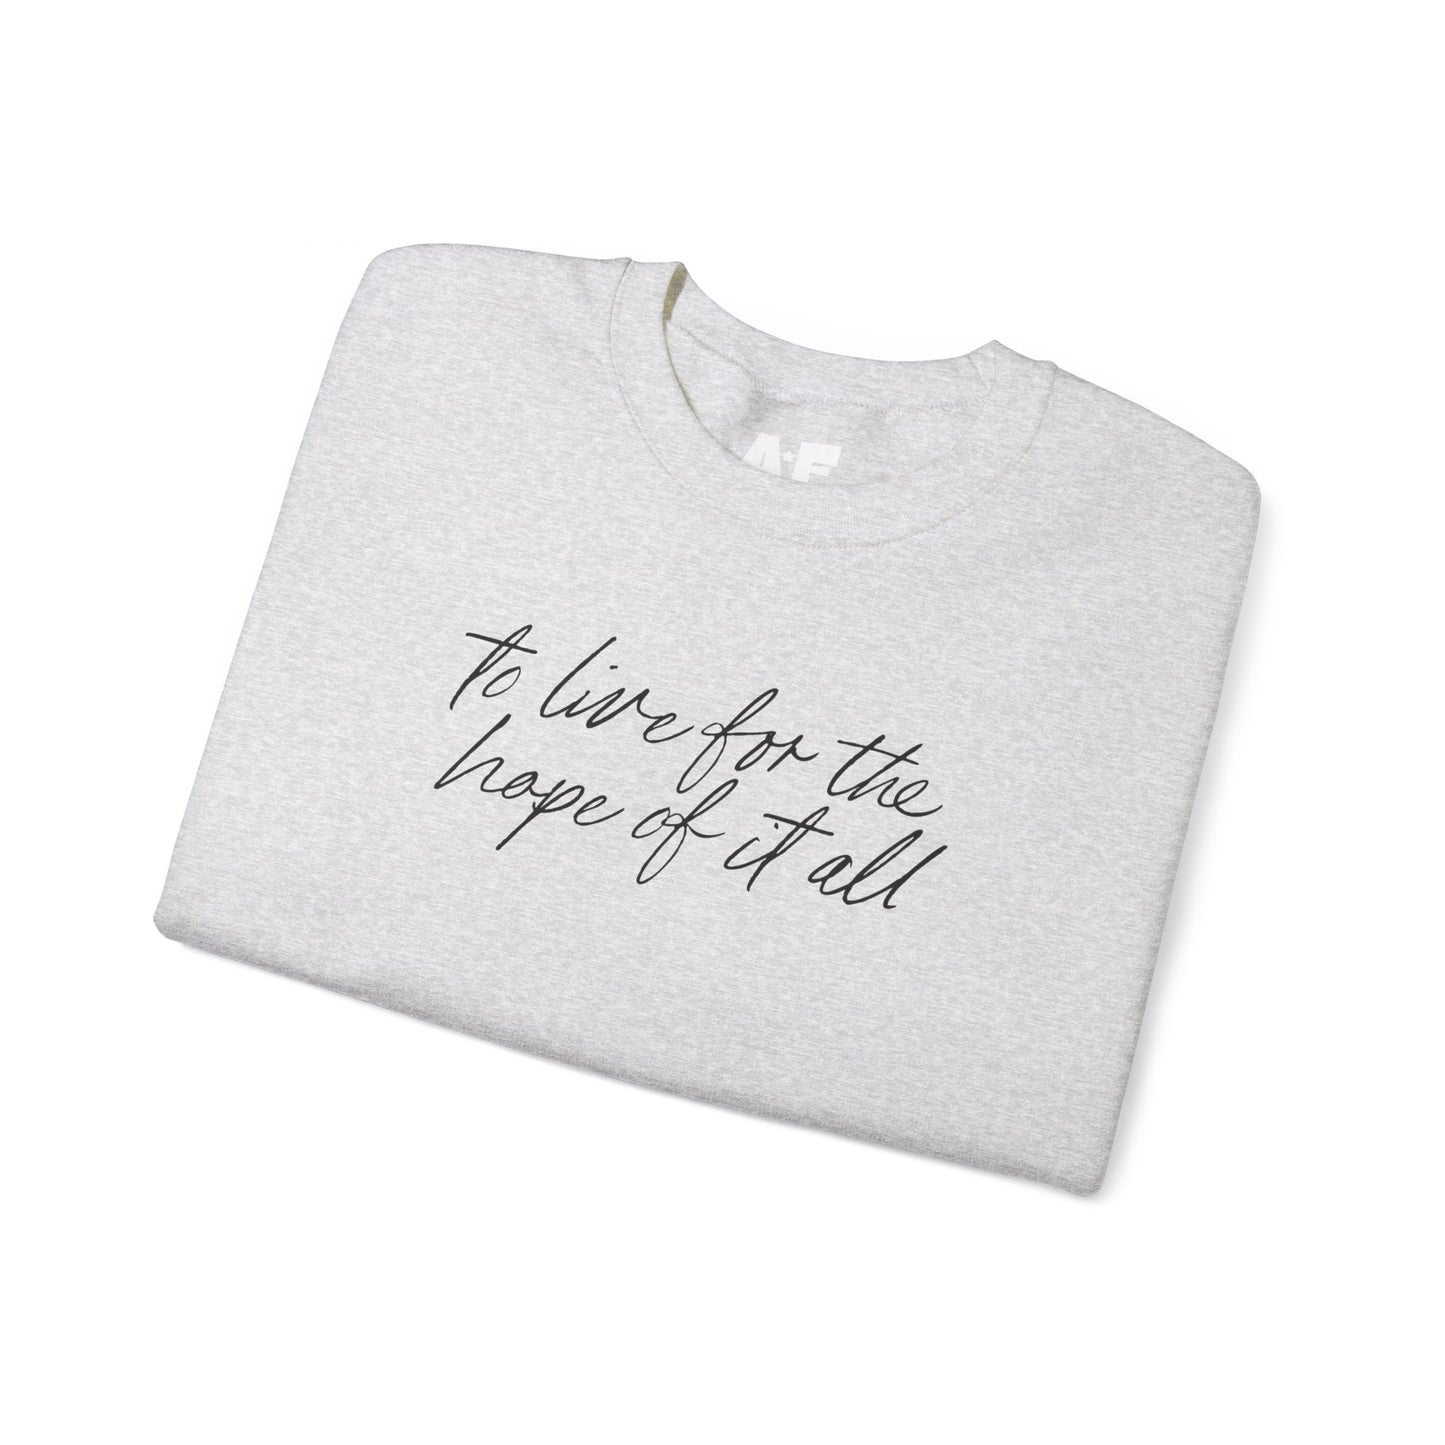 For the hope of it all - Crewneck